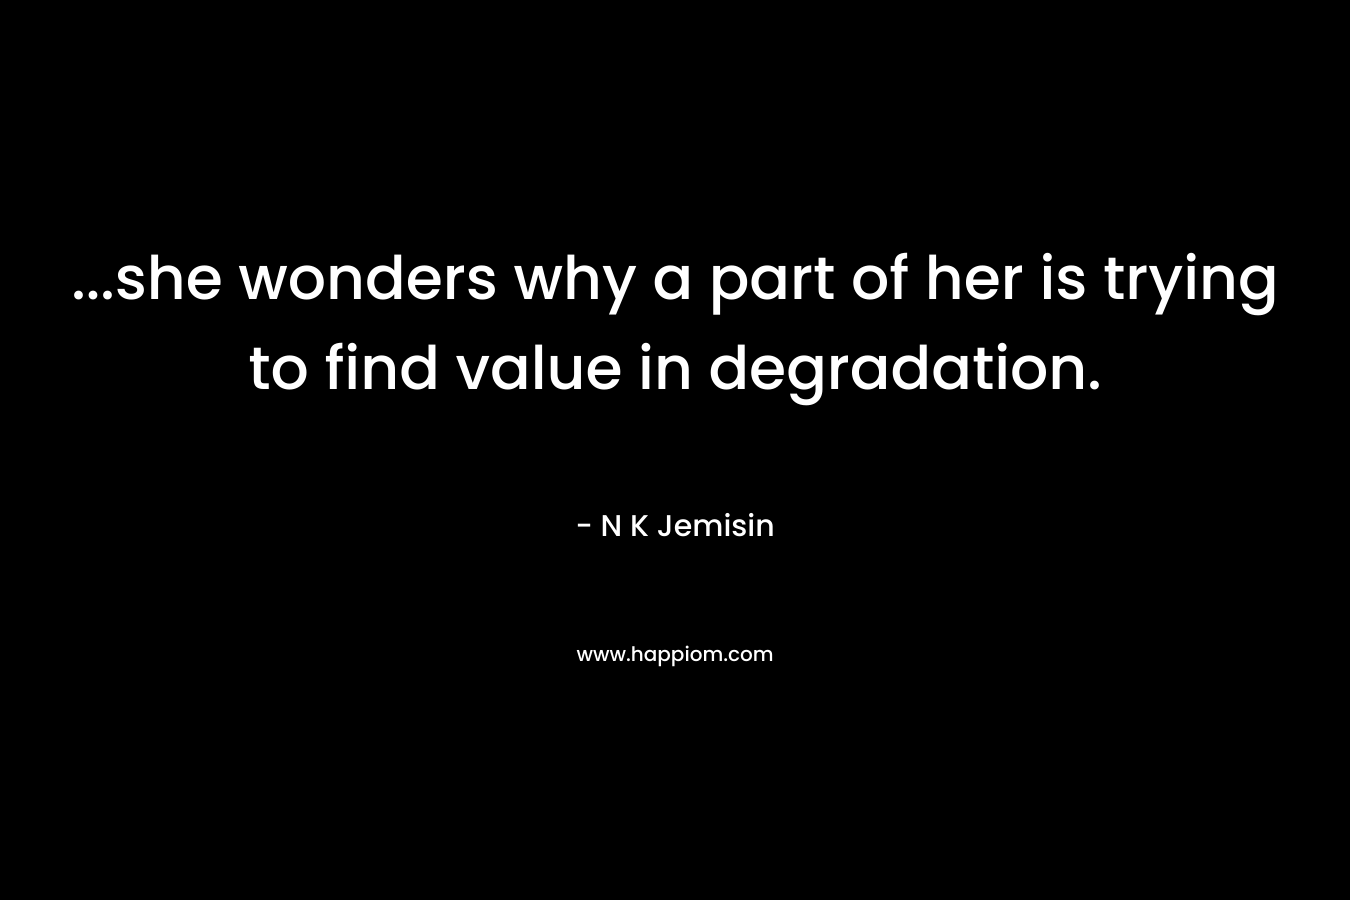 …she wonders why a part of her is trying to find value in degradation. – N K Jemisin